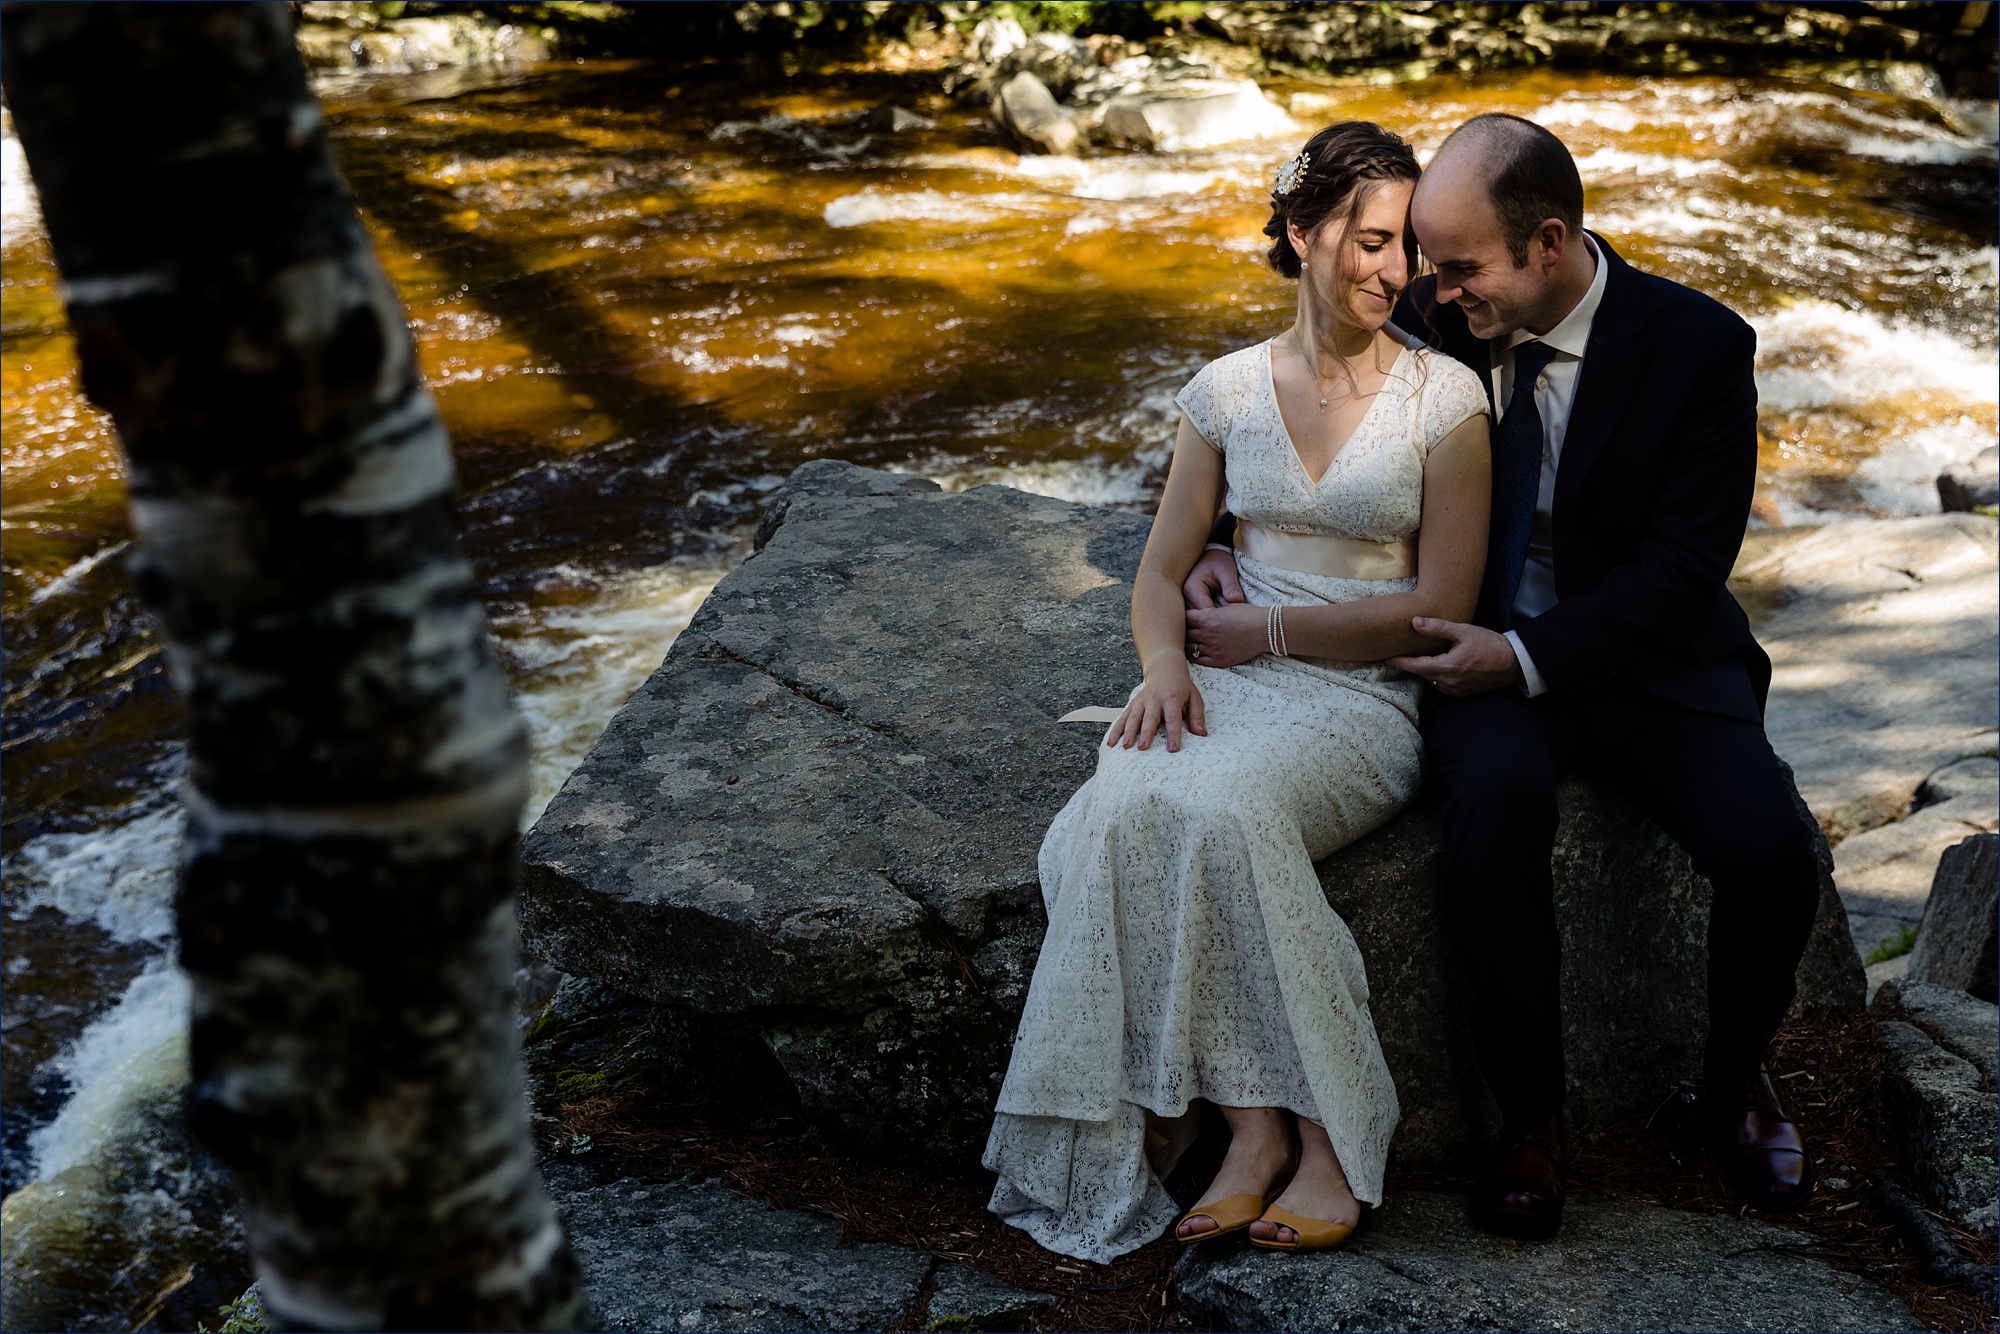 The newlyweds sit close together on the rocks in the White Mountains after eloping in NH